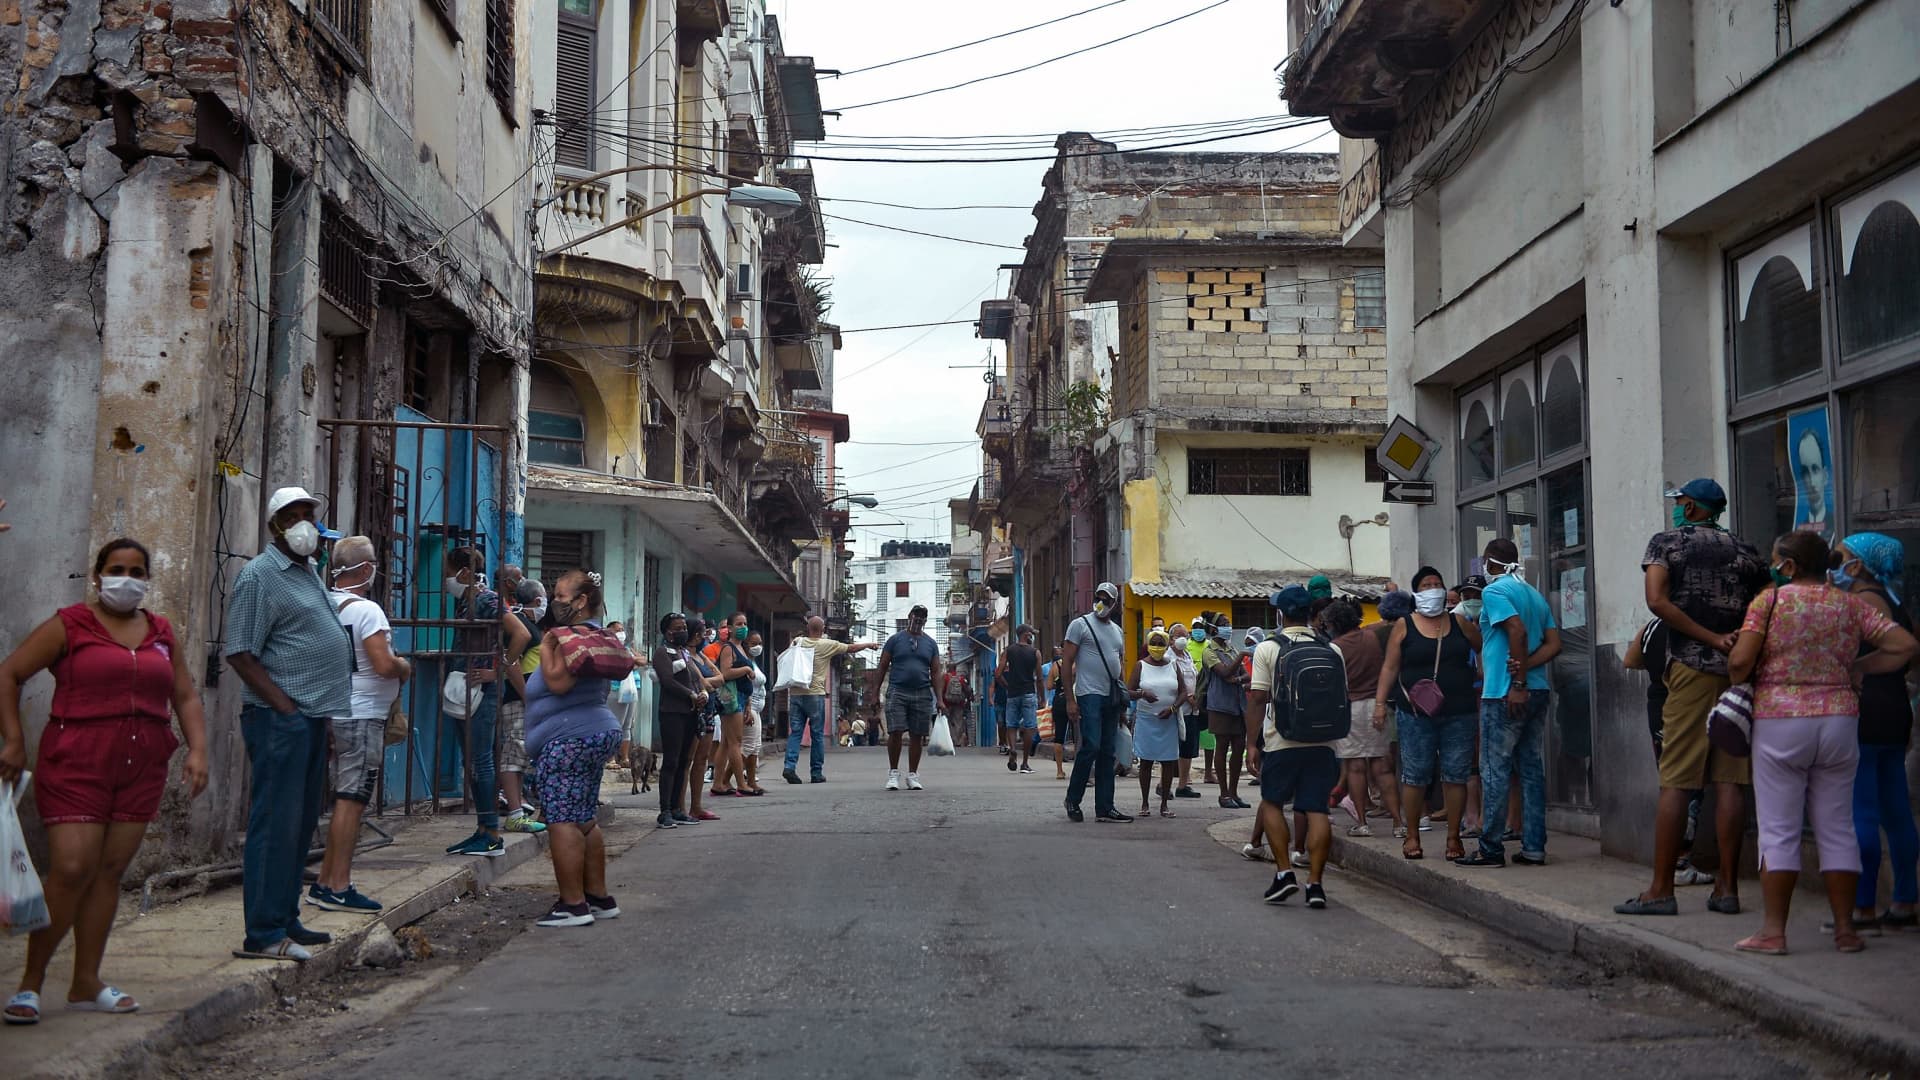 People queue to buy food in Havana, on February 2, 2021, as Covid-19 cases surge in the island nation.